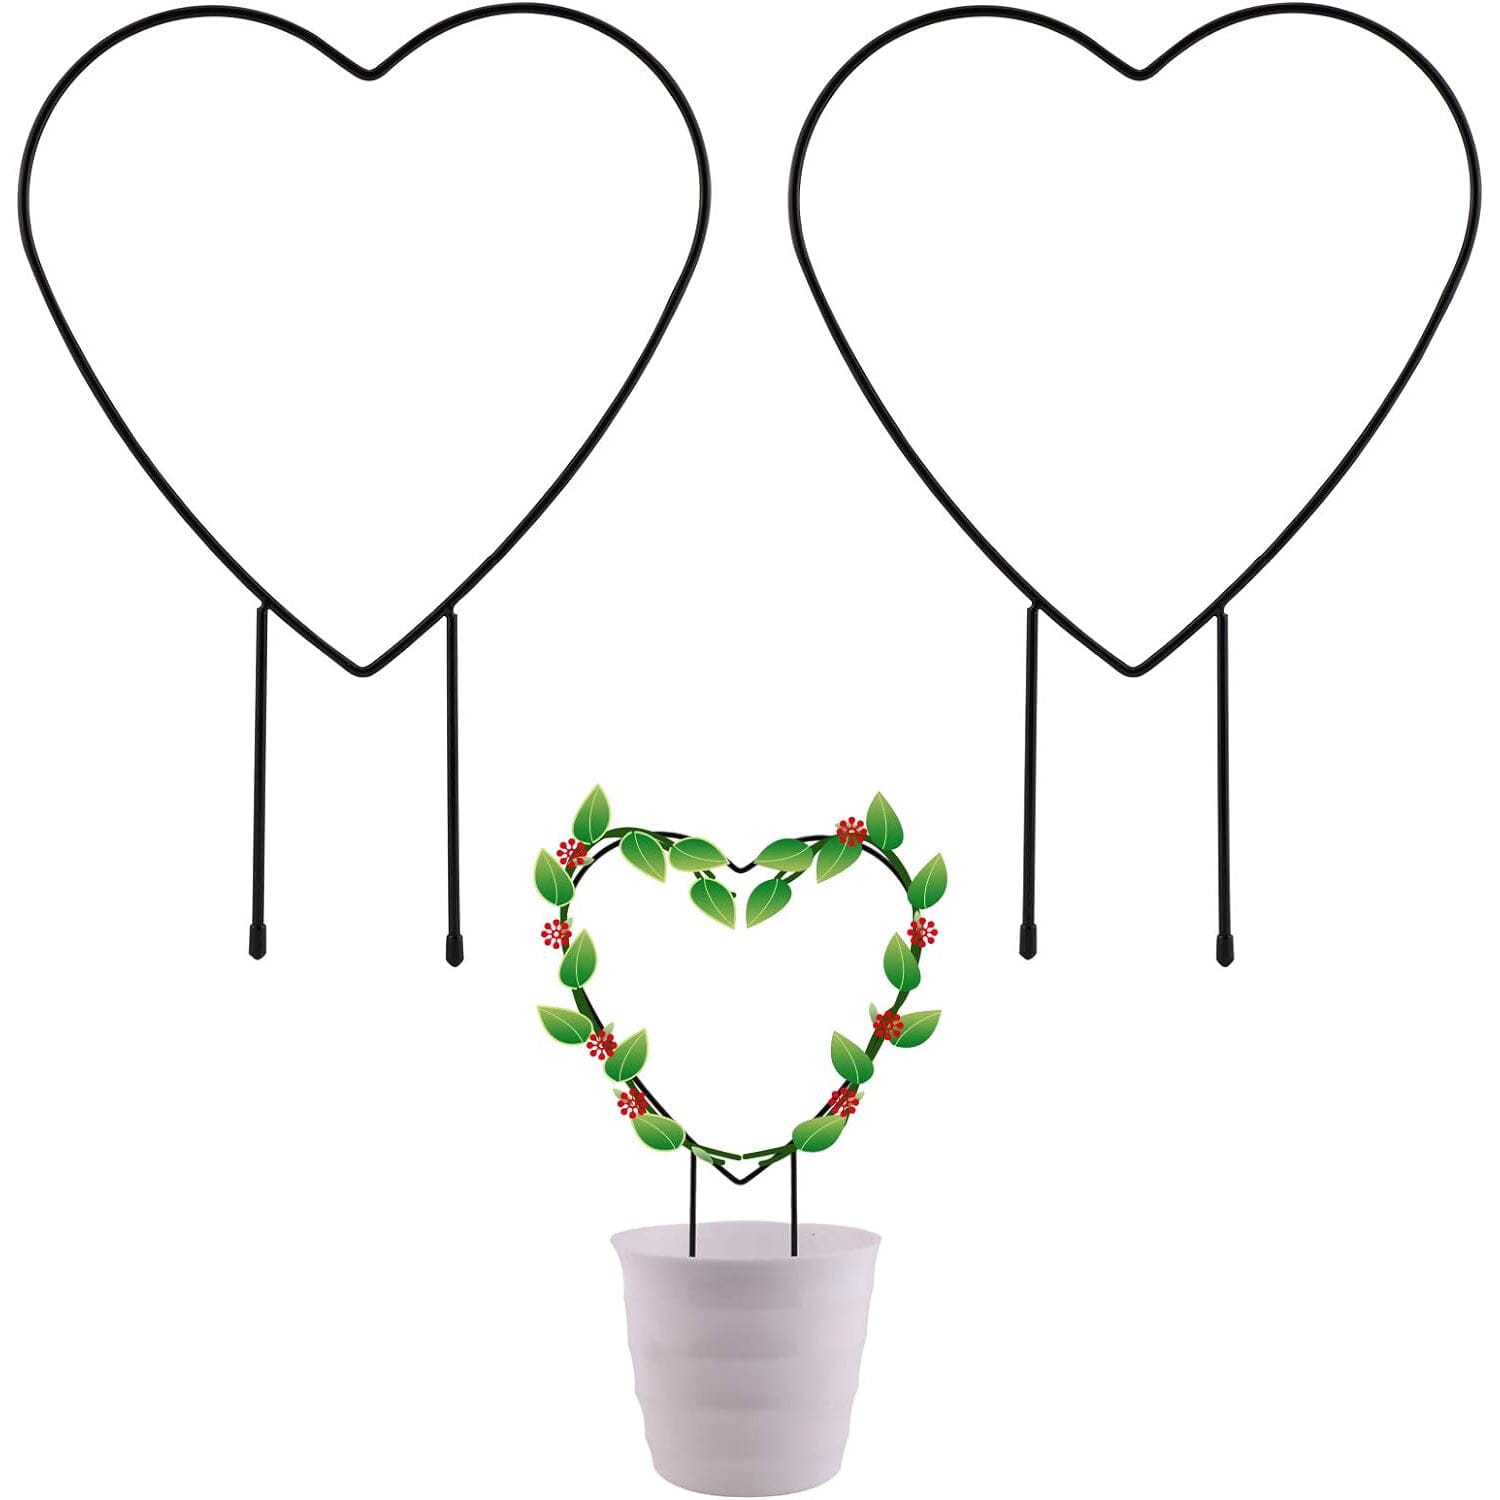 2-Pack: Heart-Shaped Plant Support Stake